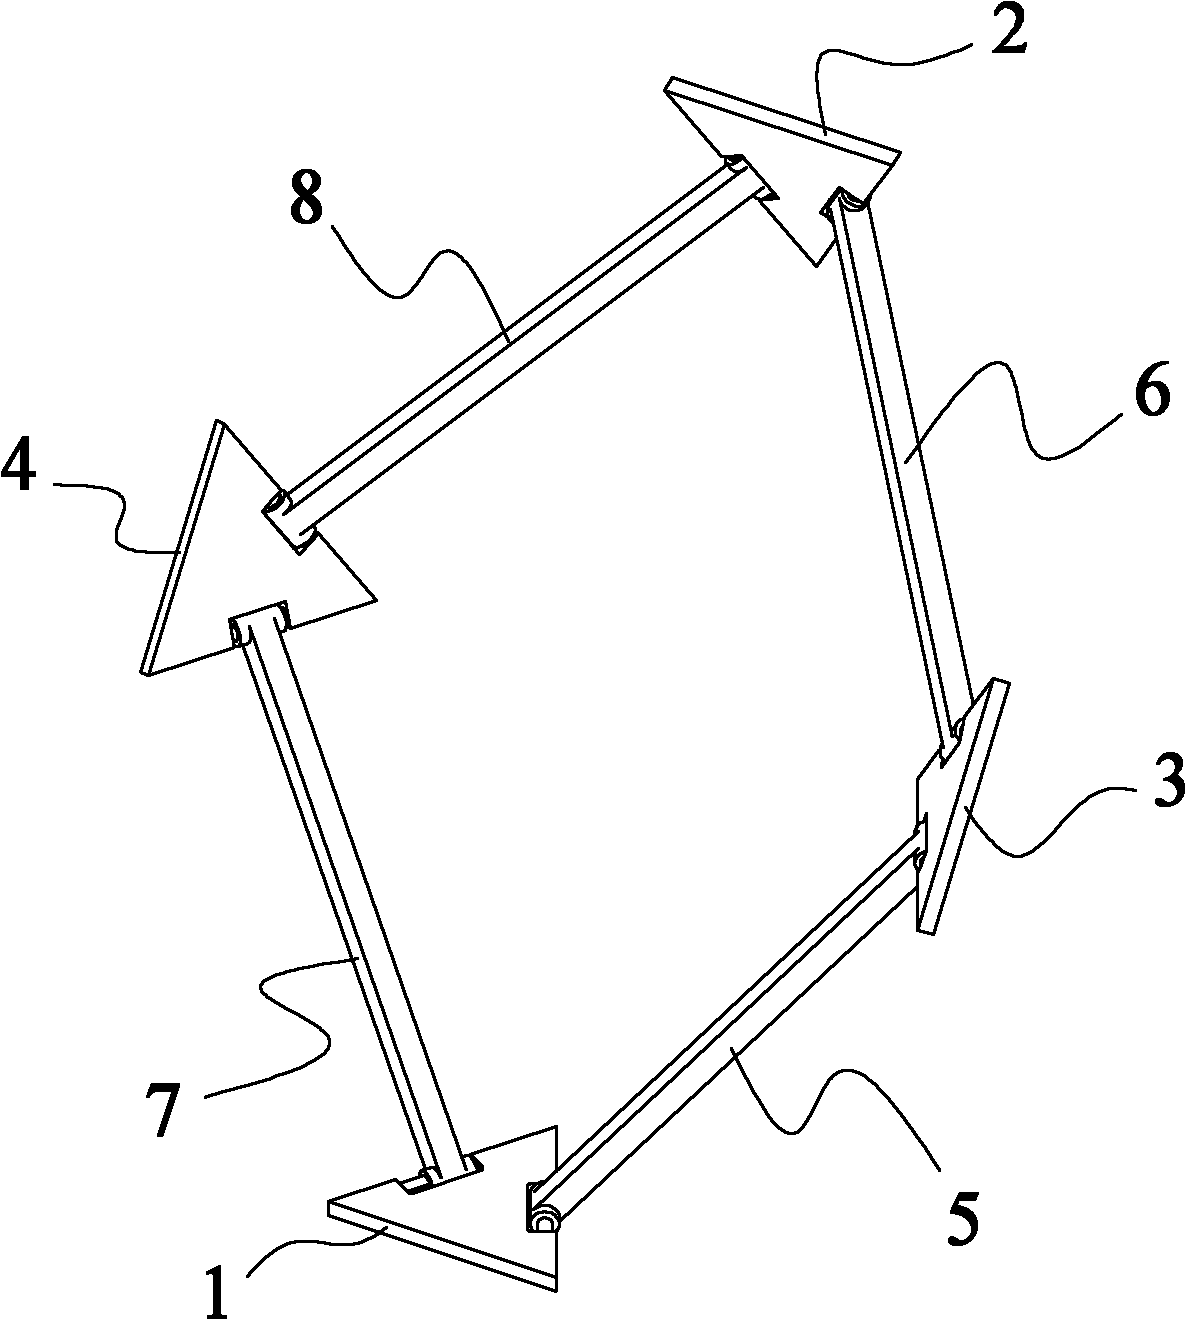 Spatial accurate straight-line motion mechanism